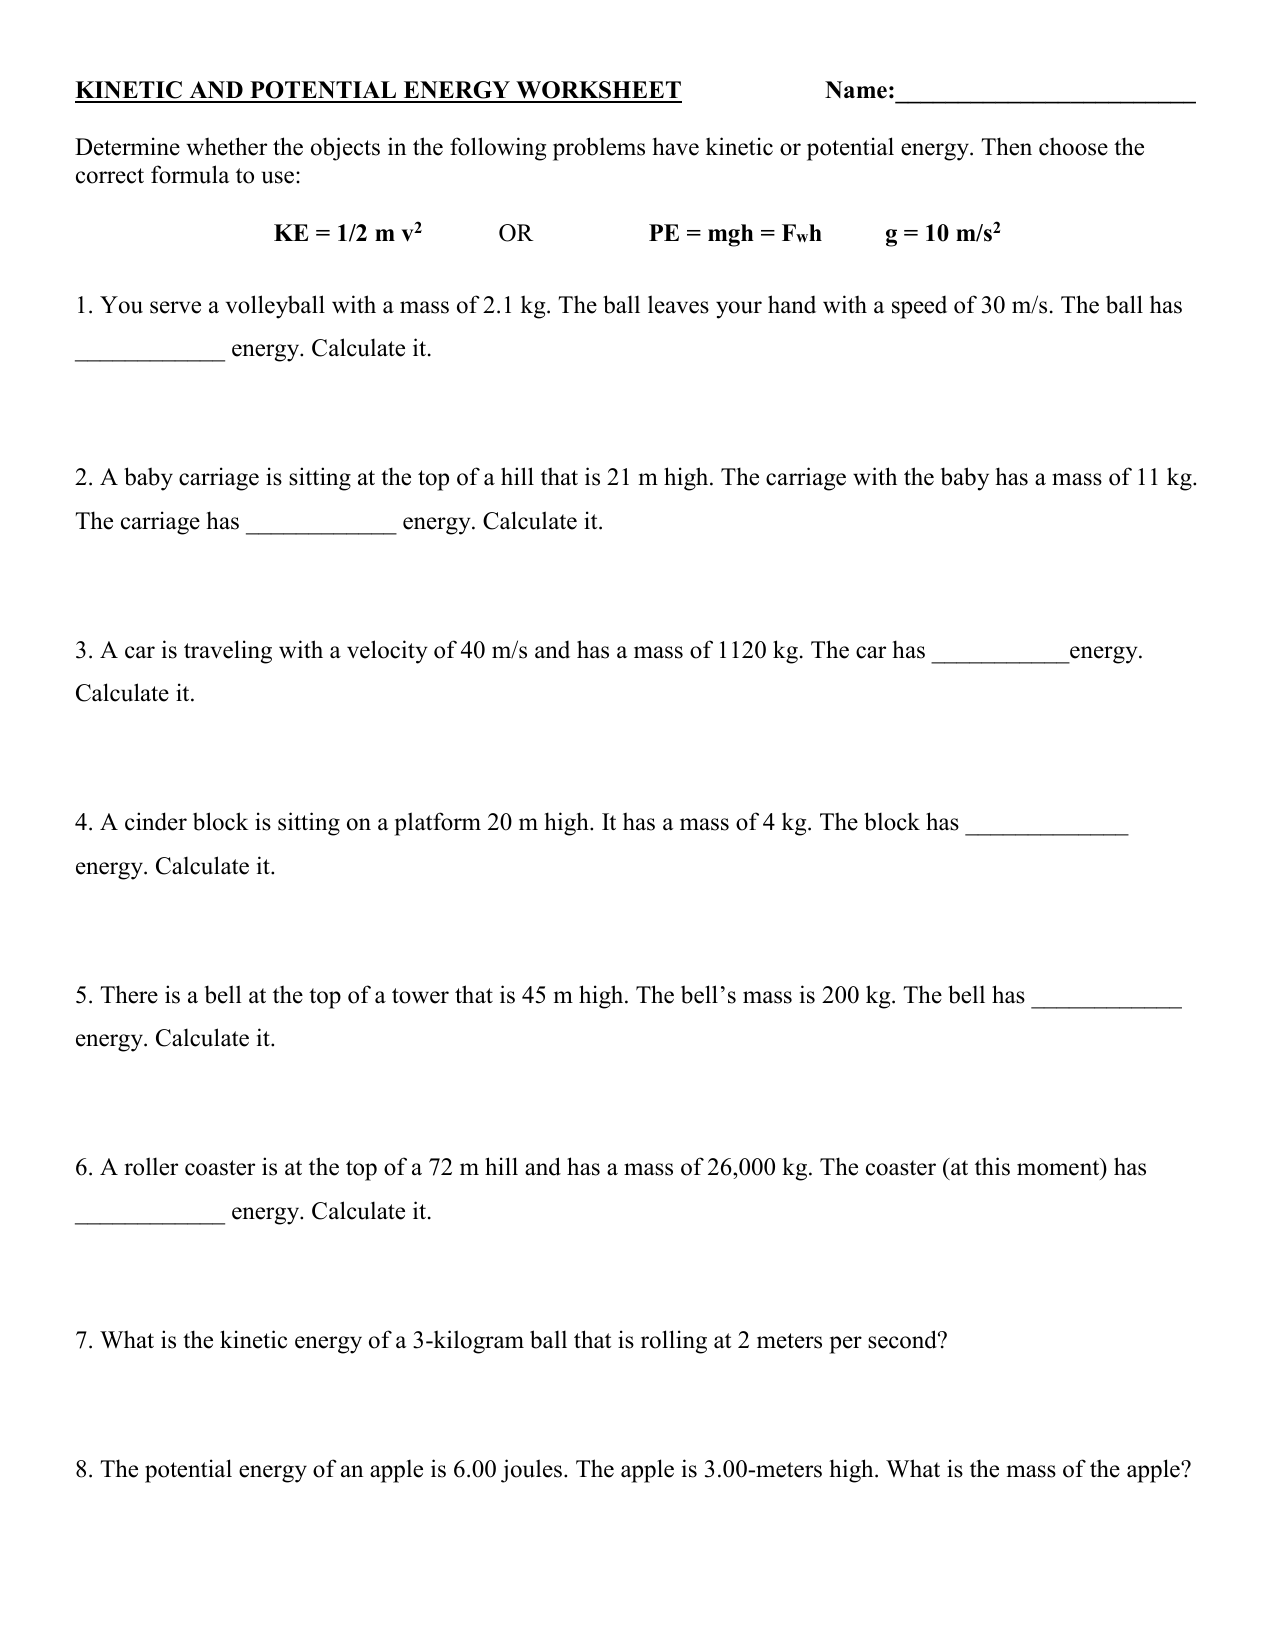 Kinetic and Potential Energy Worksheet In Potential And Kinetic Energy Worksheet